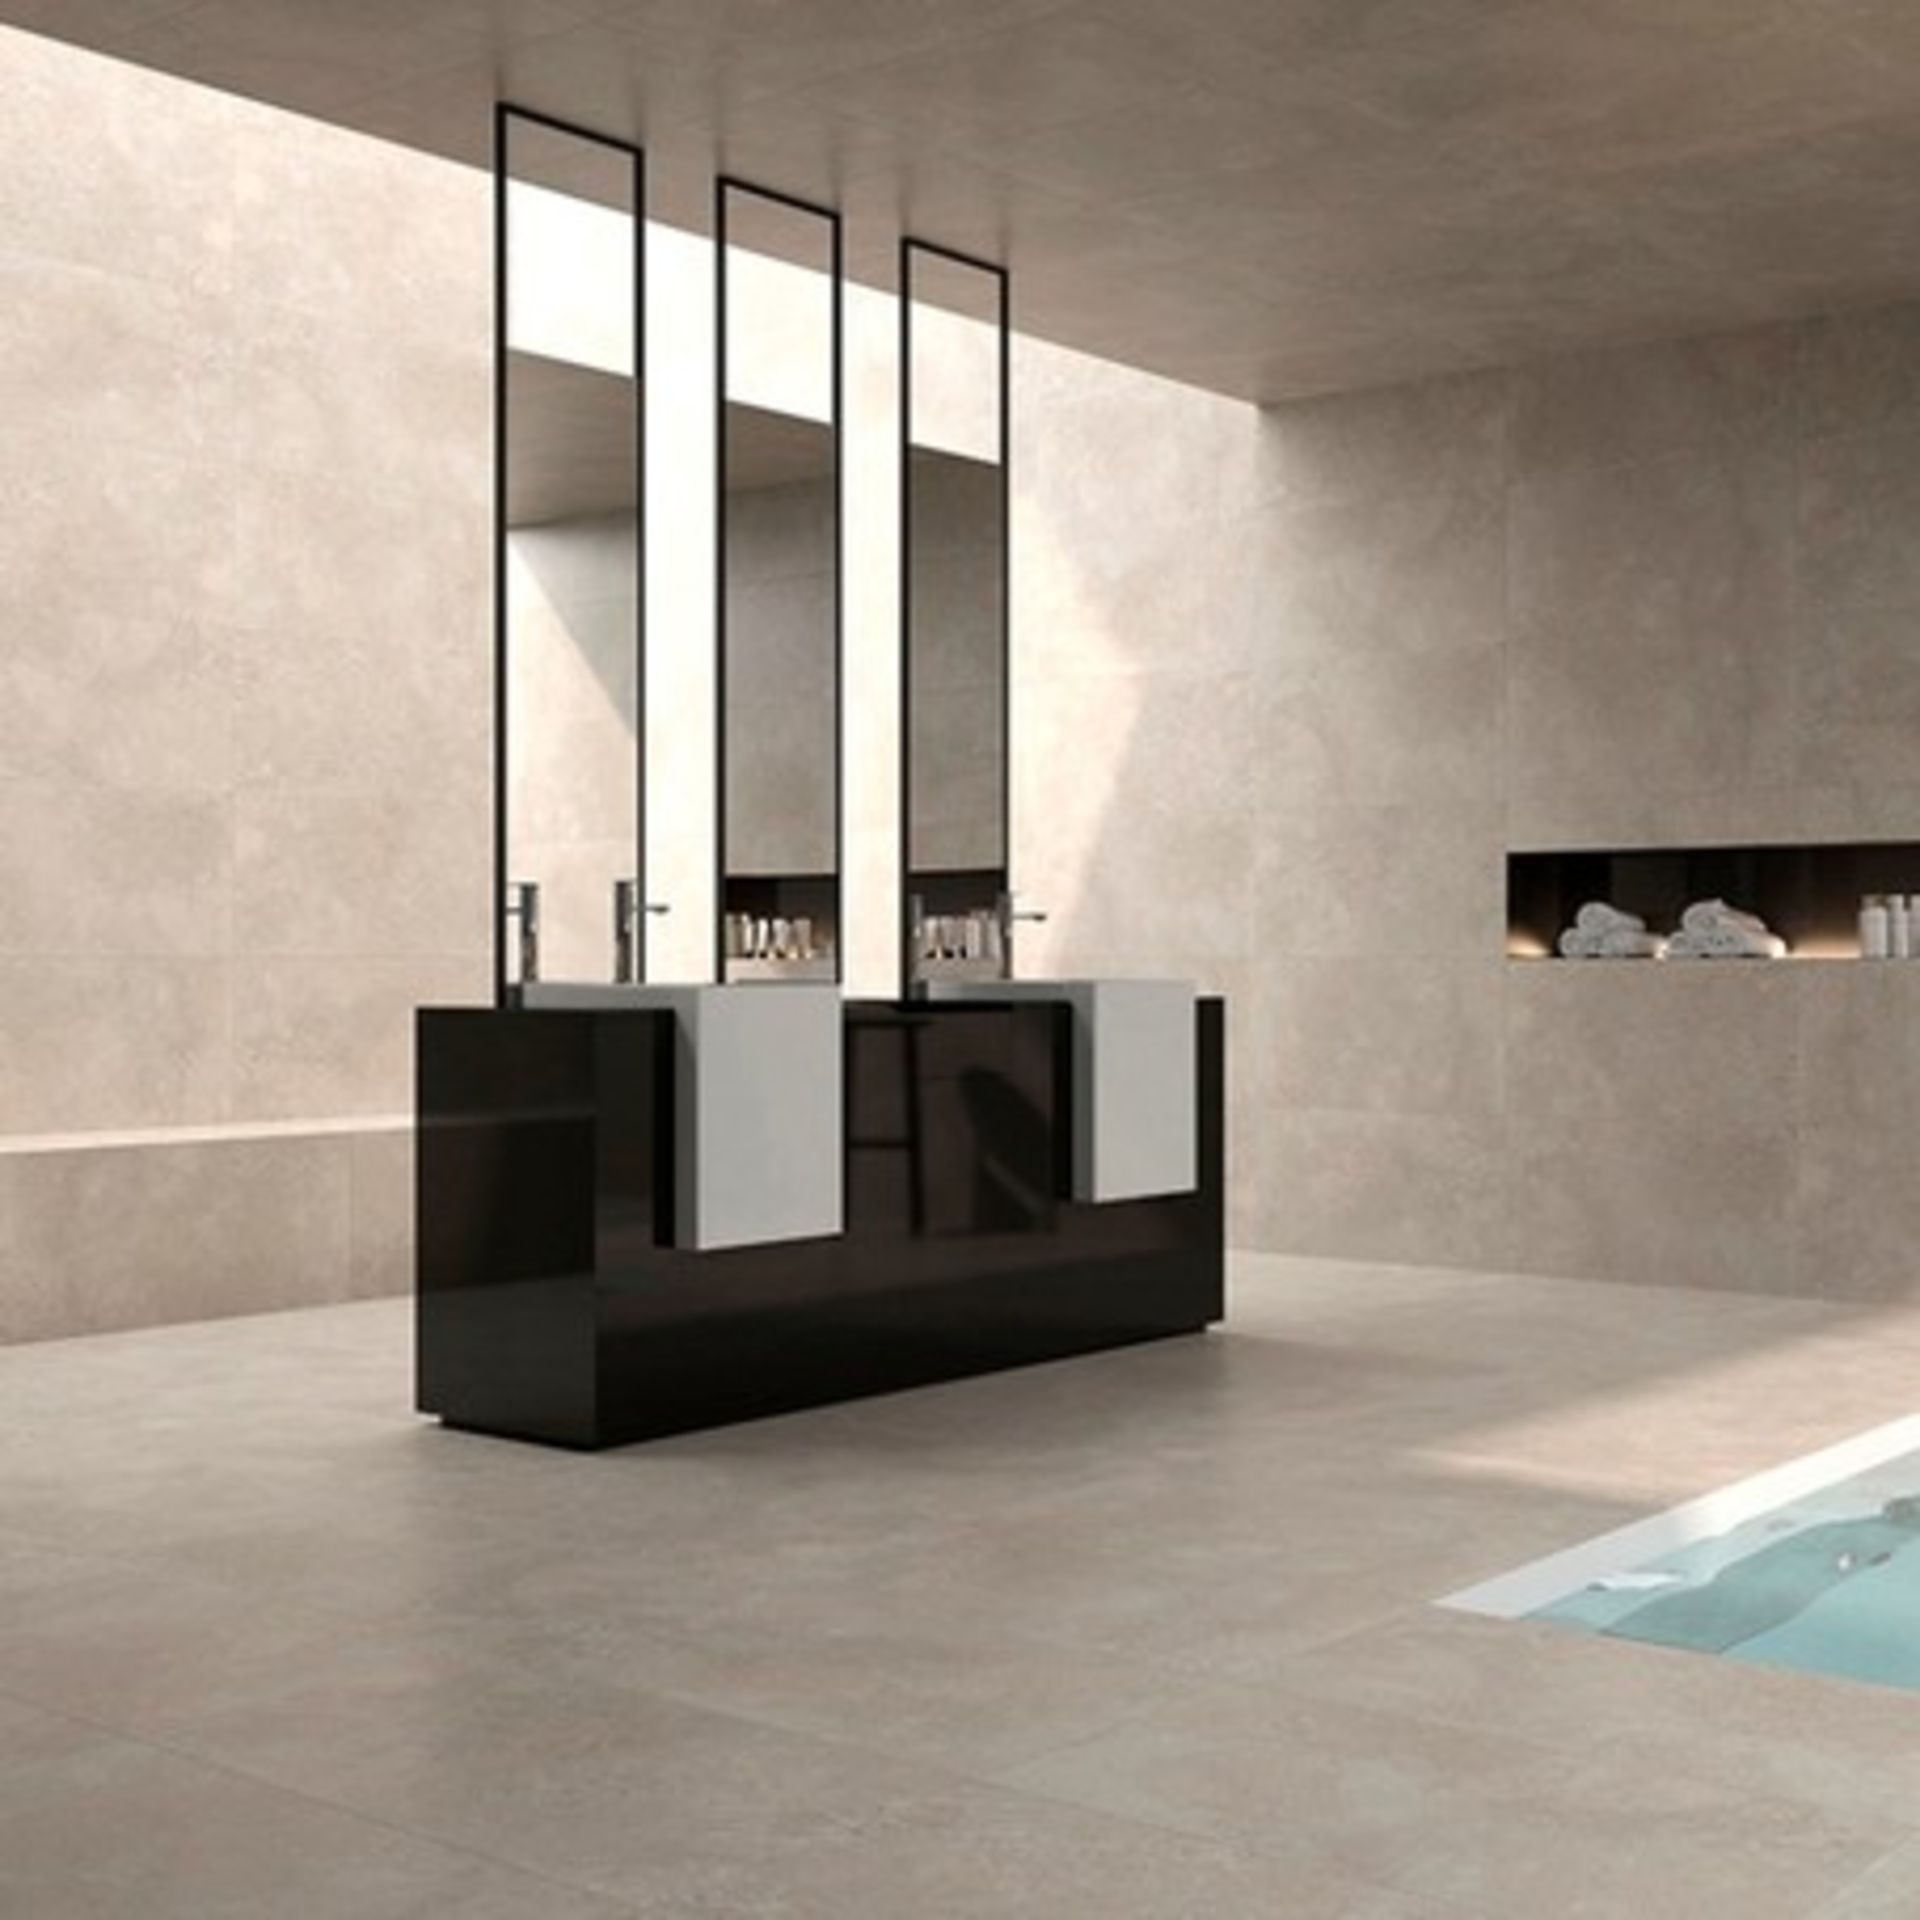 NEW 5.4m2 Veinstone Beige Polished Wall and Floor Tiles. 300x600mm, 1.08m2 per pack. If you...